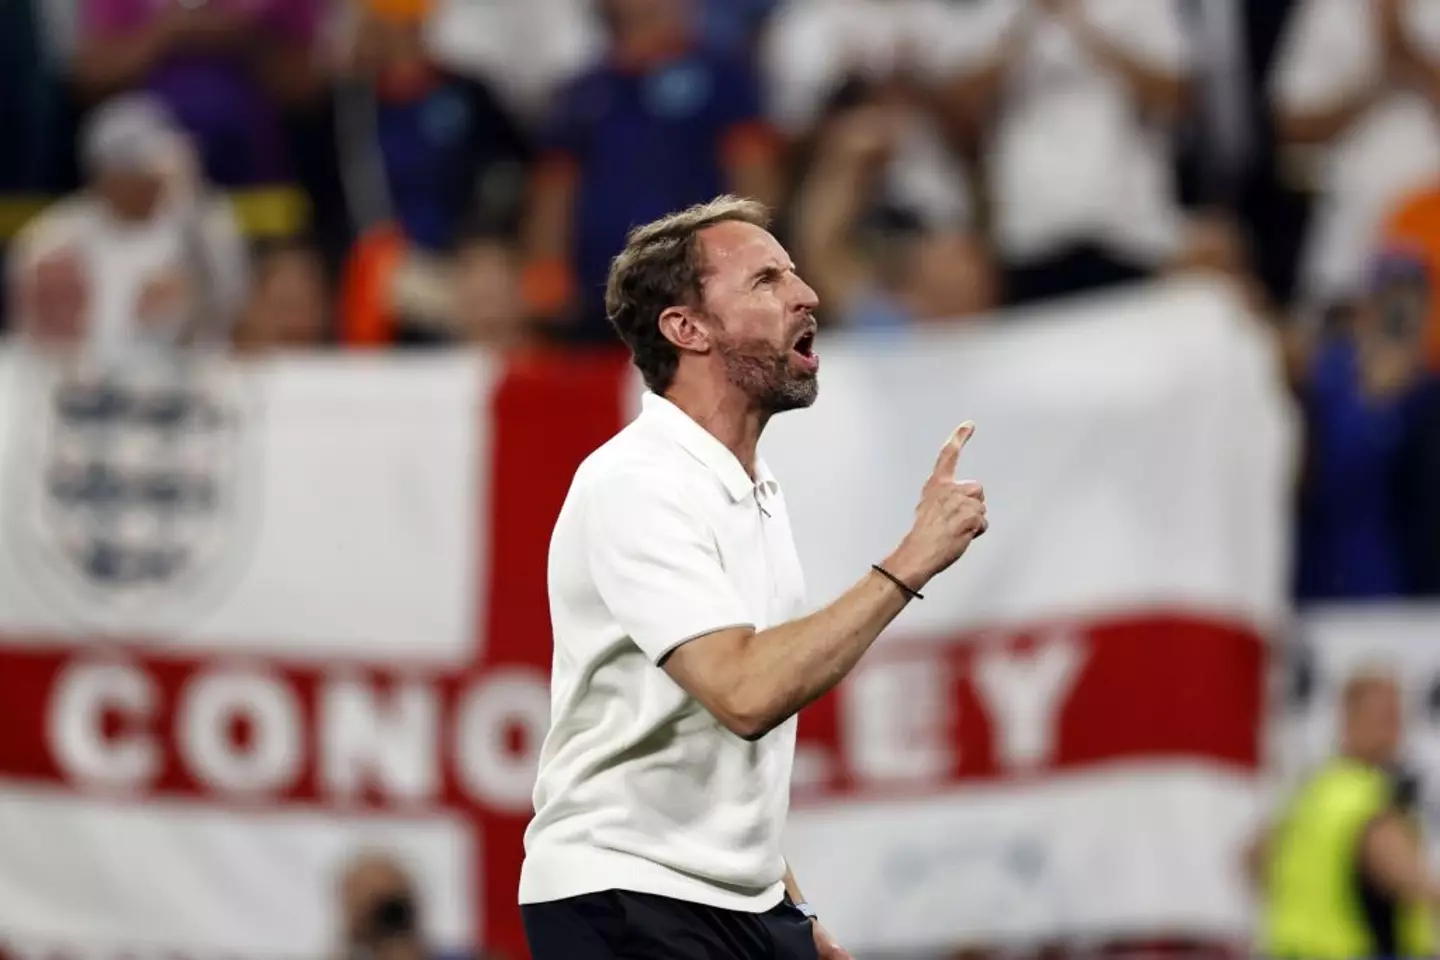 Gareth Southgate was excited about the goal last night (July 10). (ANP / Contributor / Getty Images)